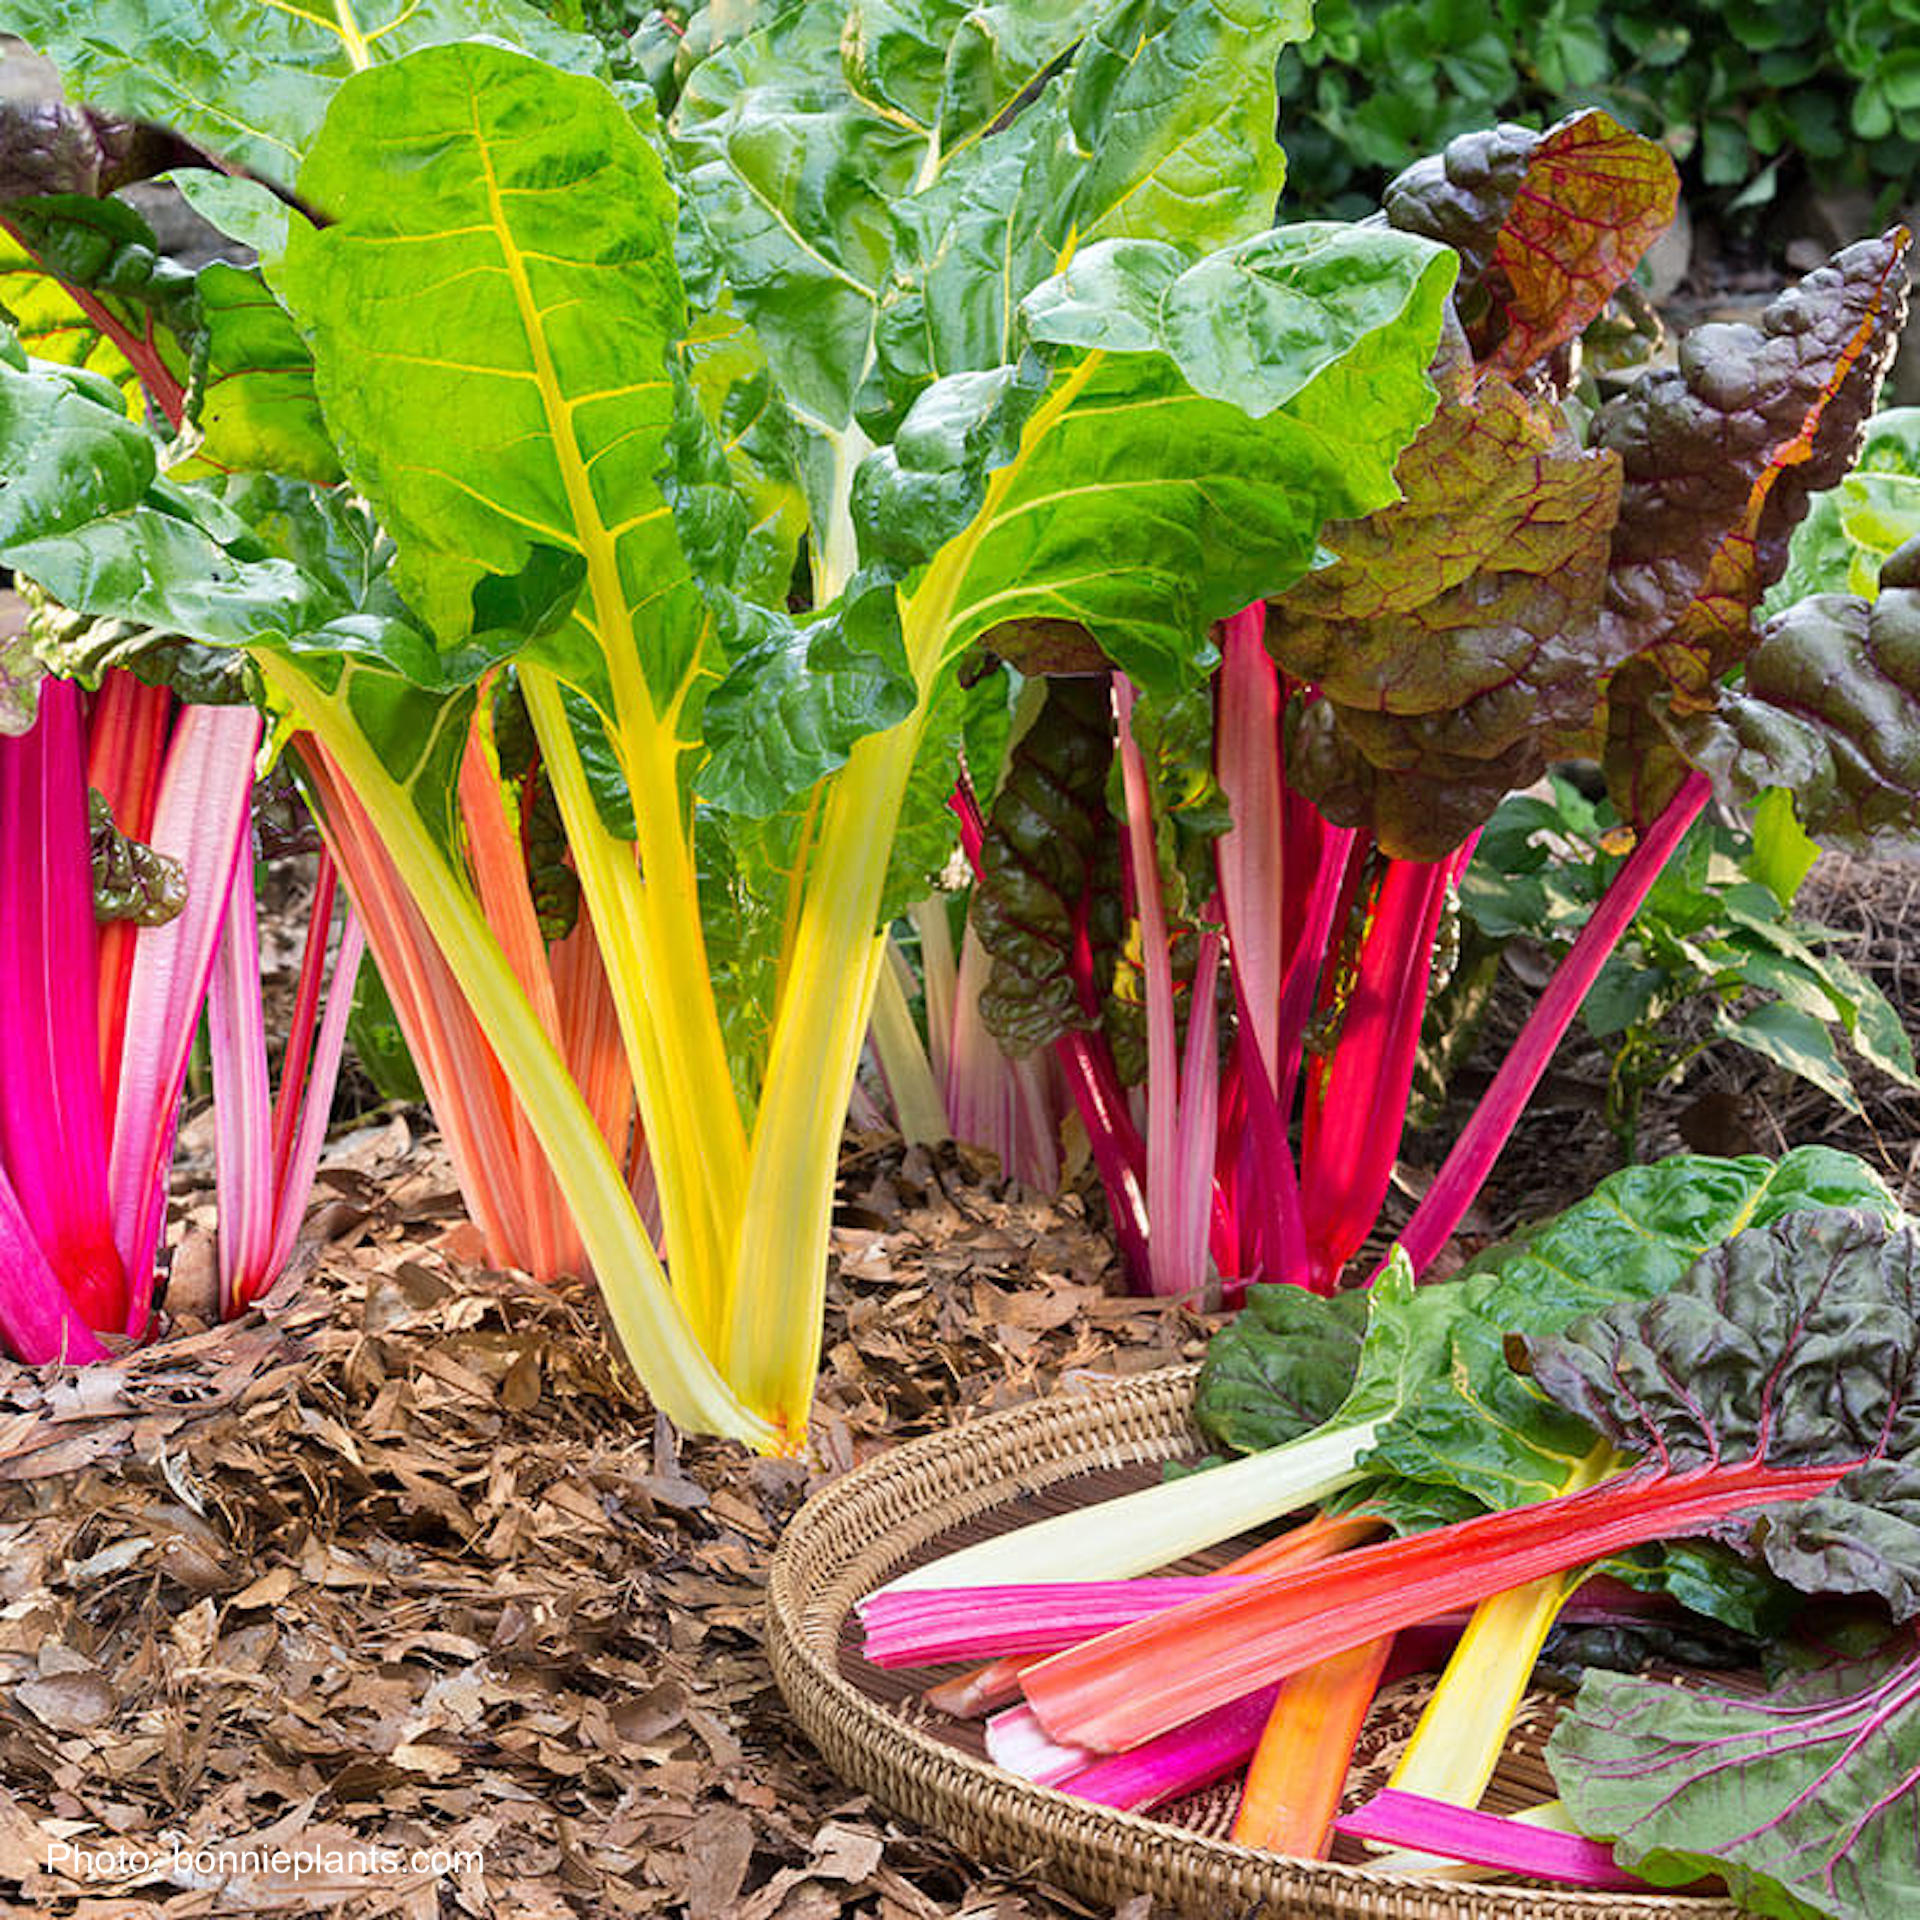 Swiss chard in various colors in the garden and also harvested leaves.